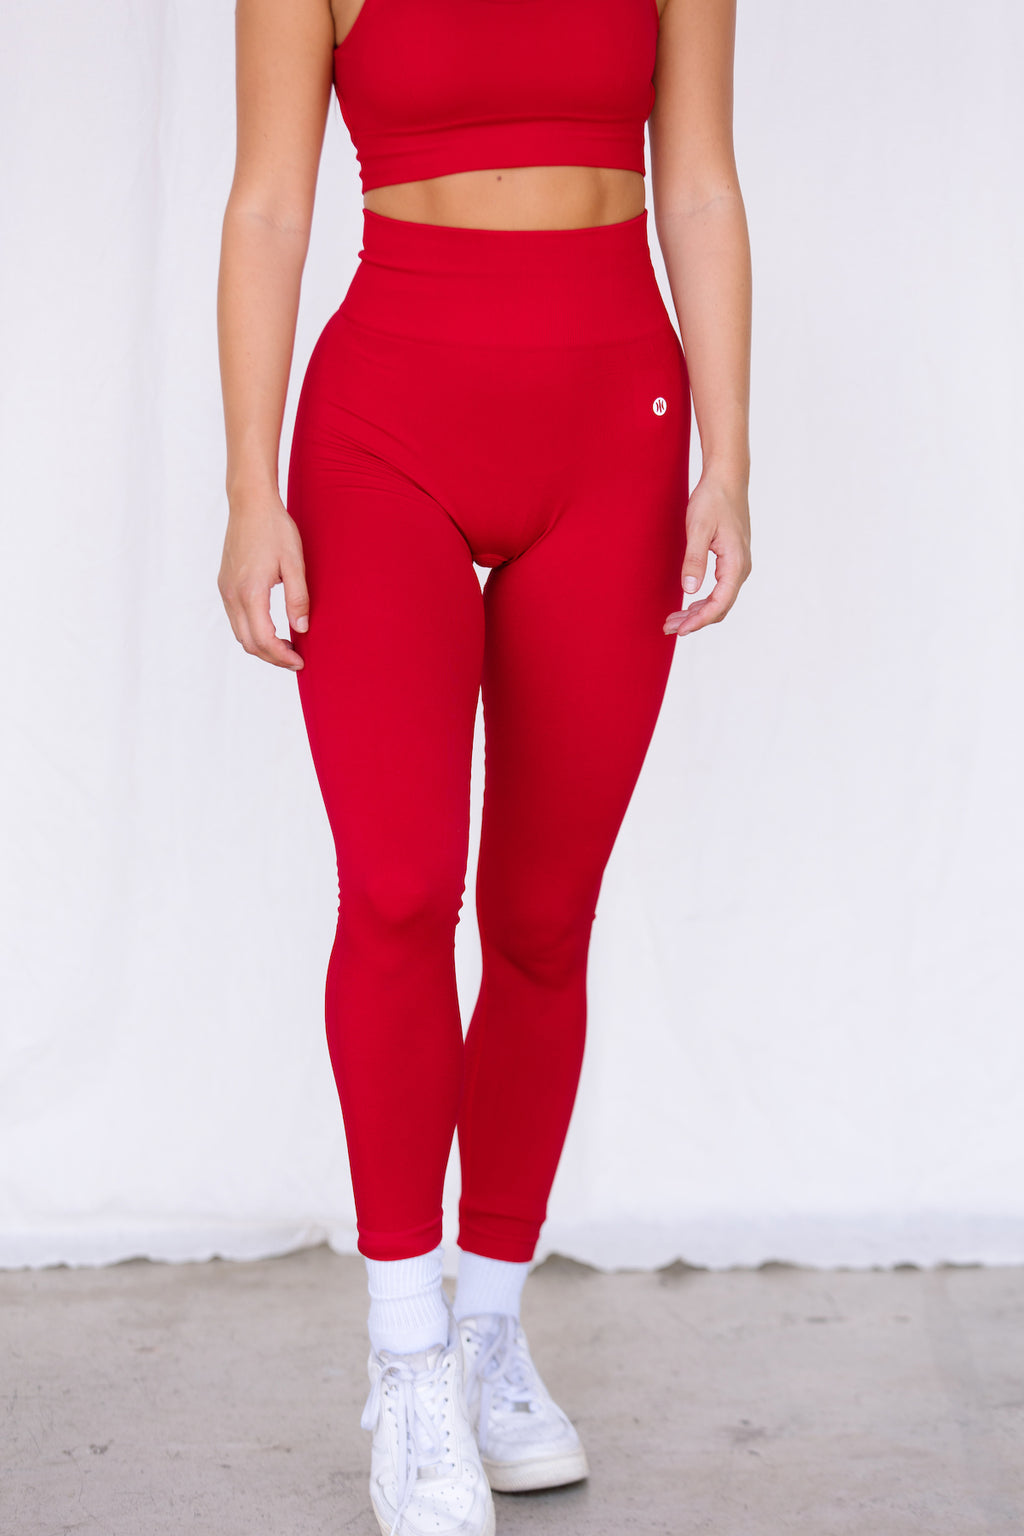 Video Review of #ASTORIA ACTIVEWEAR VELOCITY Seamless Zip Up by Miranda, 5  votes